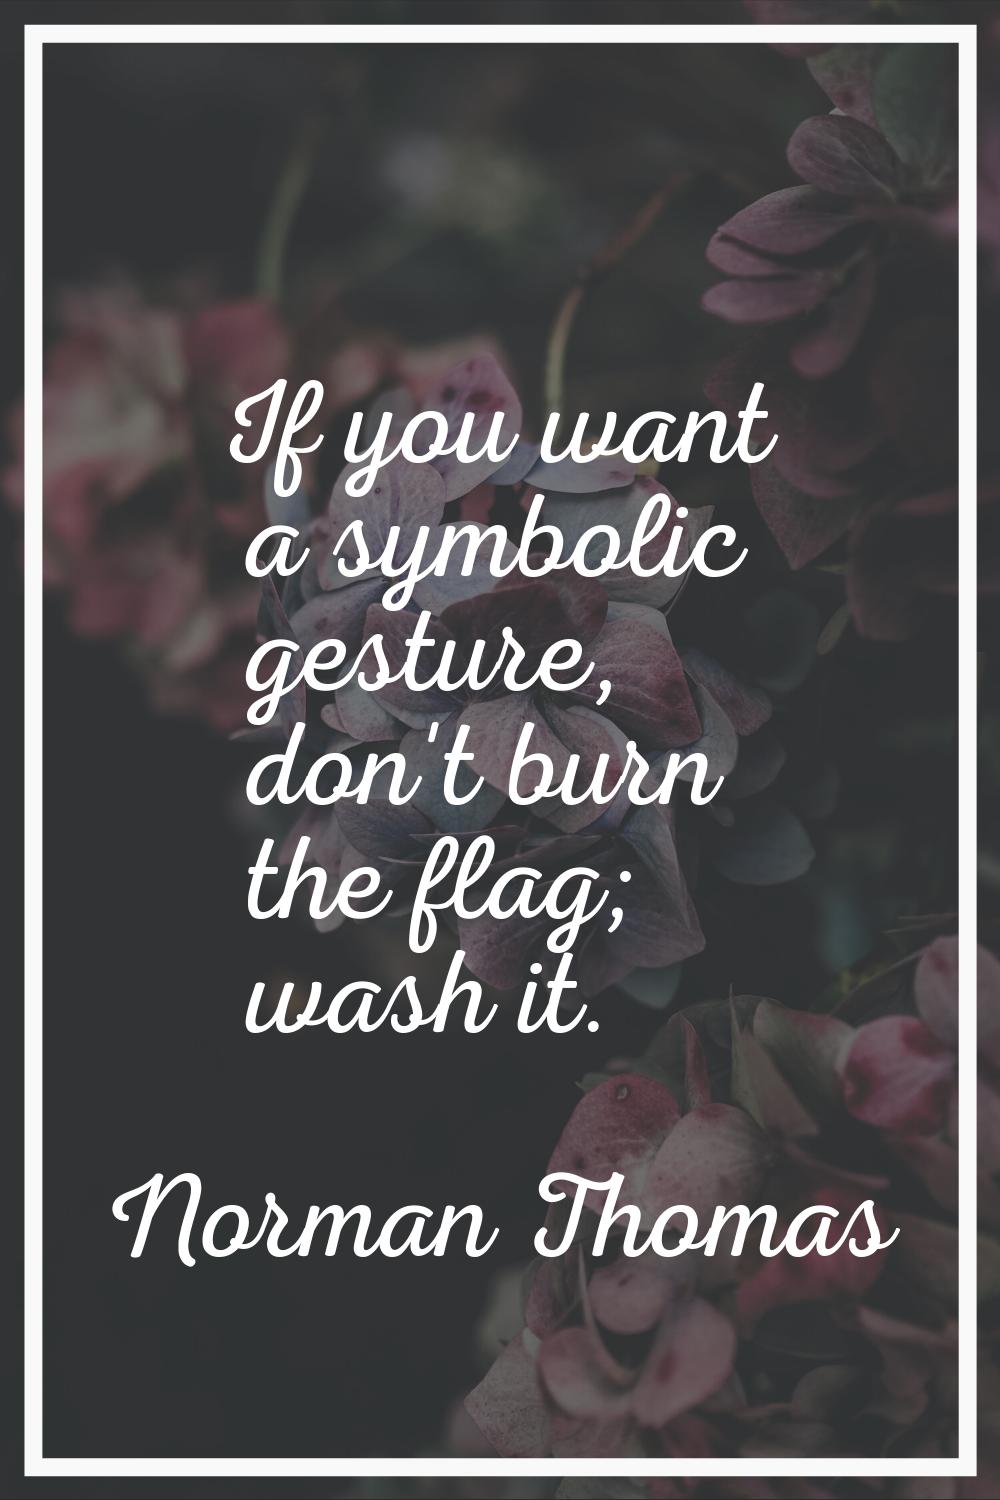 If you want a symbolic gesture, don't burn the flag; wash it.